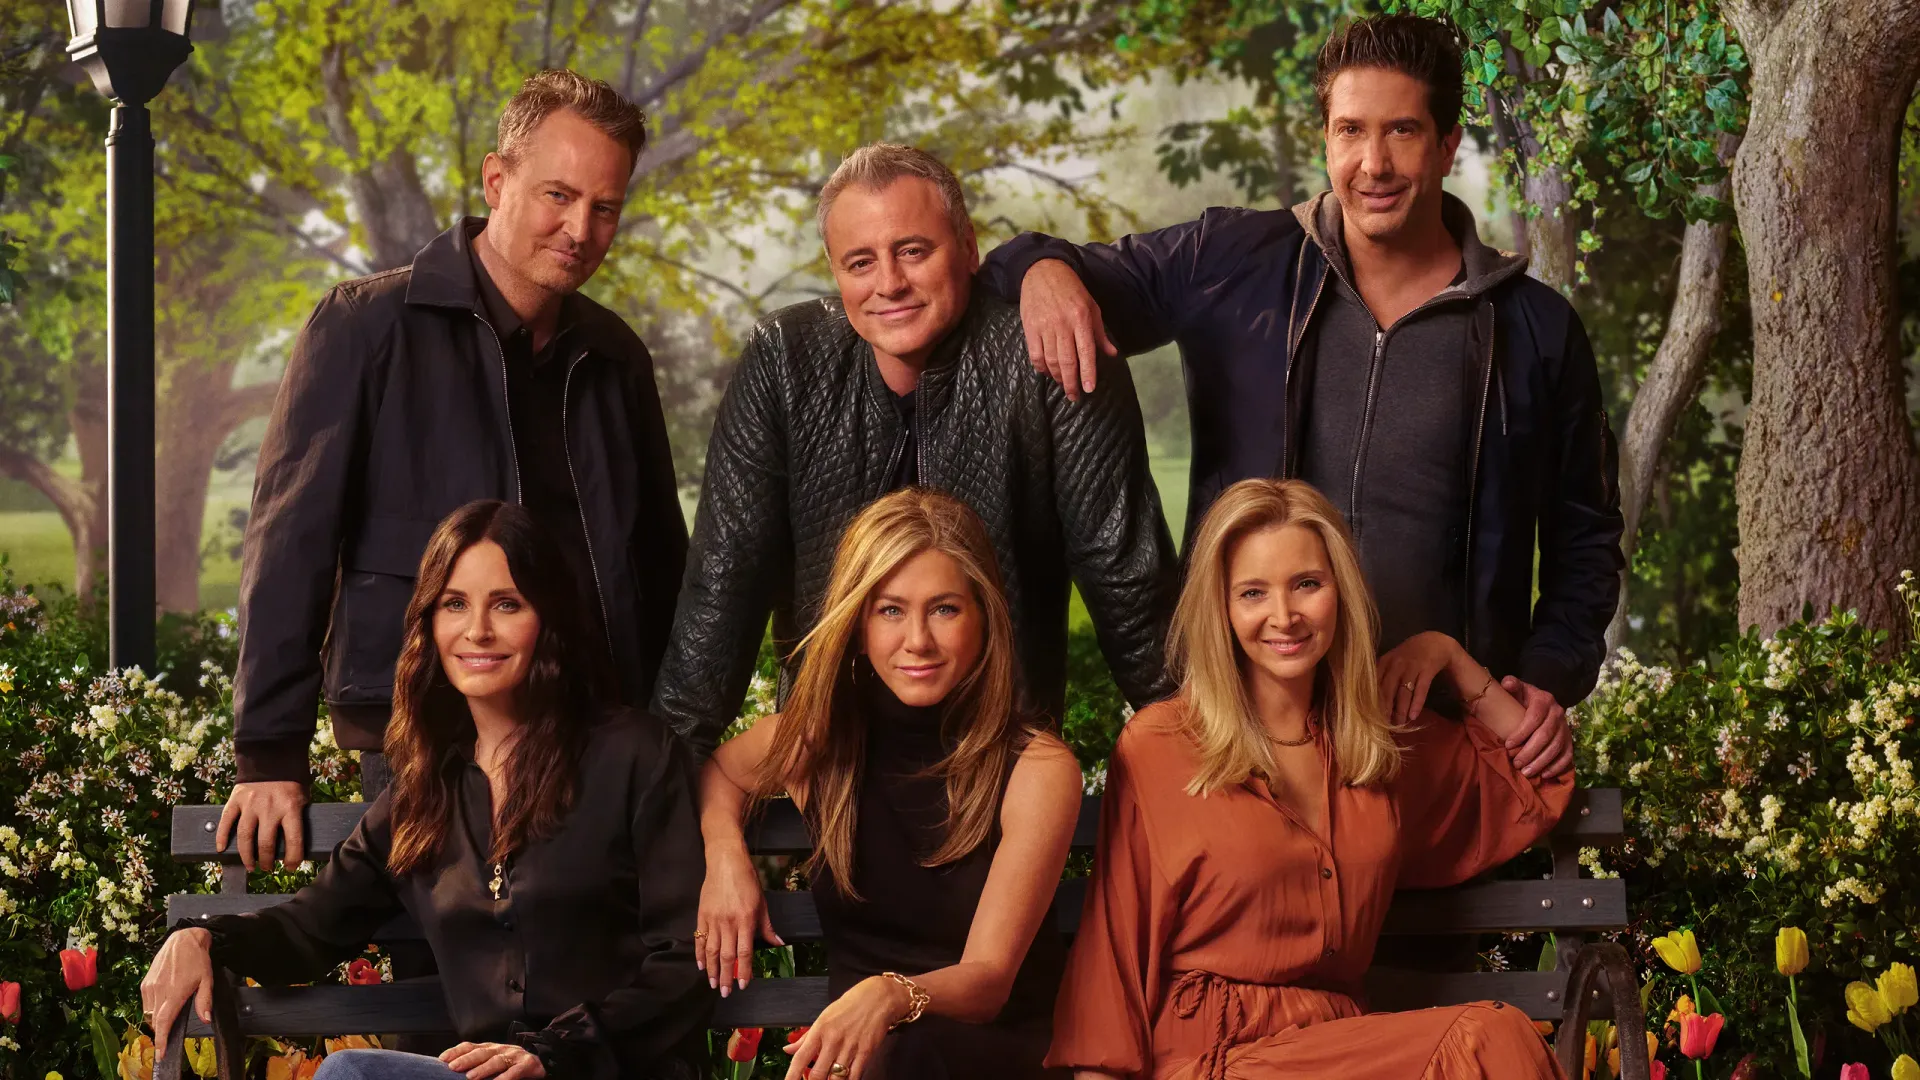 The cast of 'Friends' 17 years later